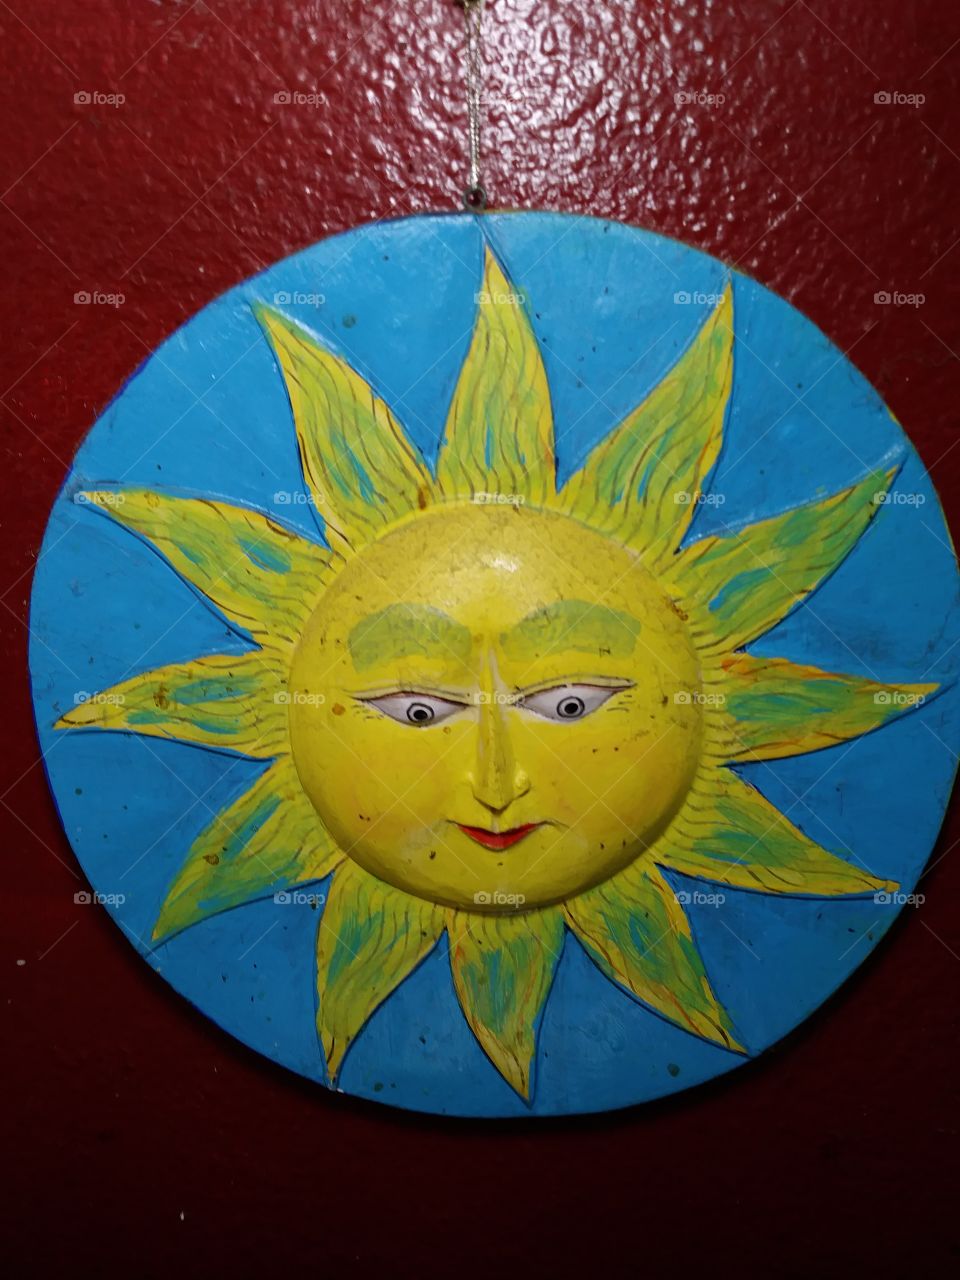 This is a painted plaster sun plaque hanging on a red wall. The sun is yellow and is surrounded by a blue circle. The sun is smiling.